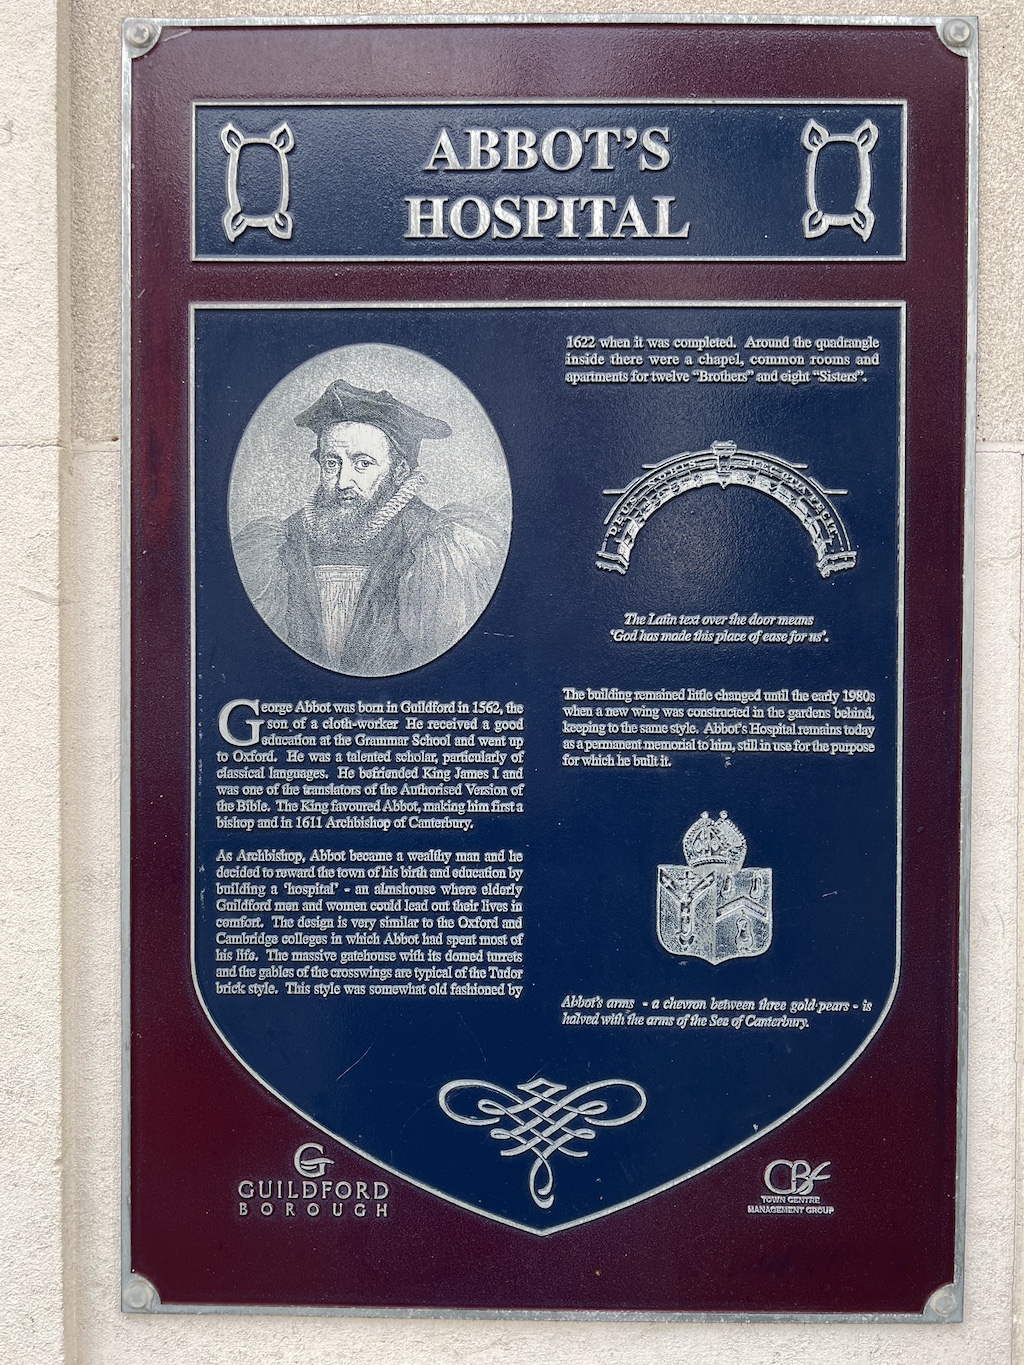 Blue plaque in Guildford for Abbot's Hospital